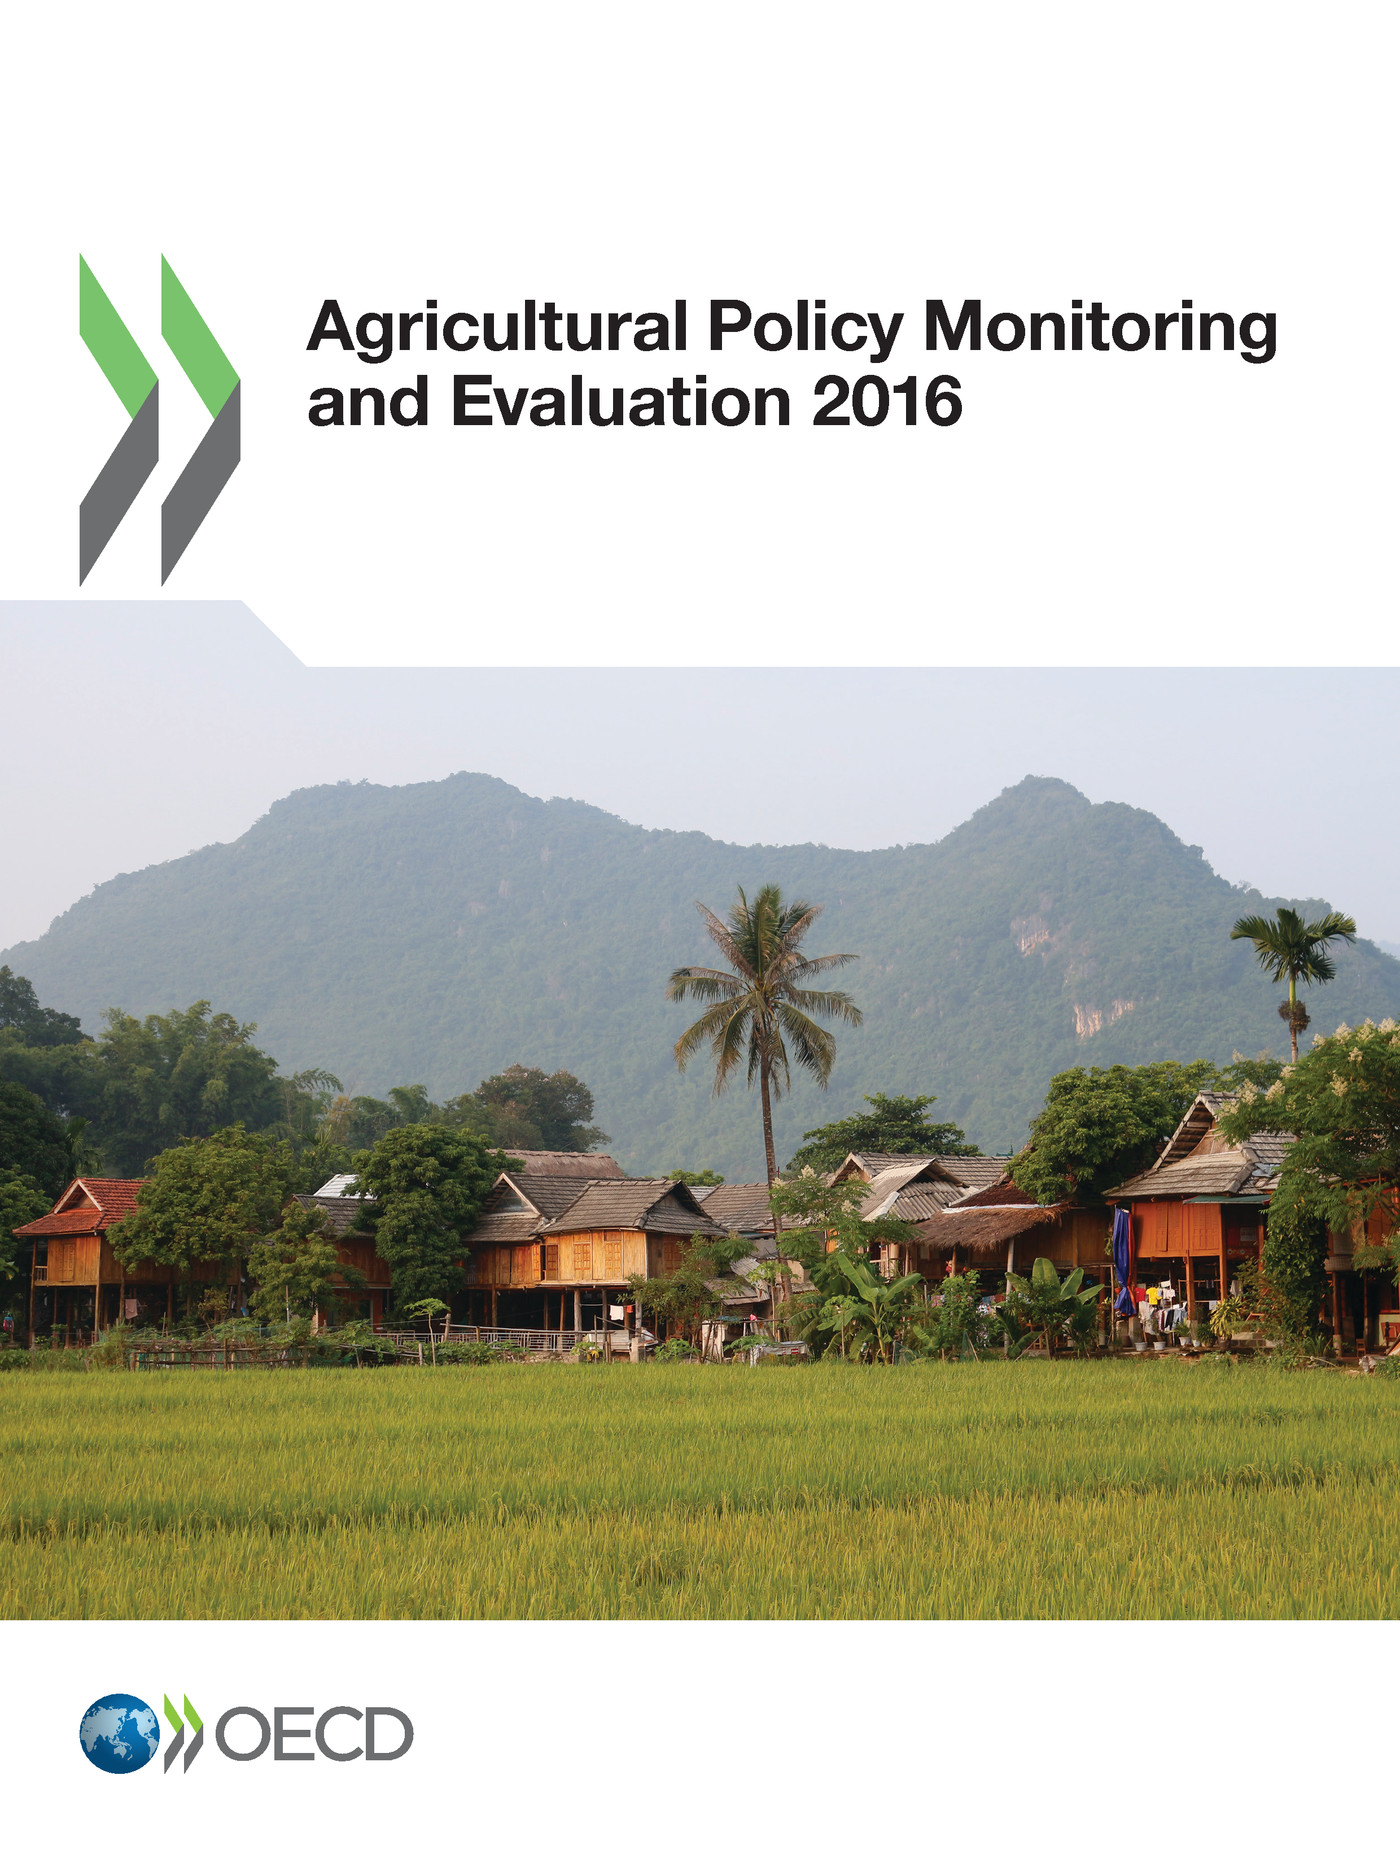 Agricultural Policy Monitoring and Evaluation 2016 -  Collectif - OCDE / OECD